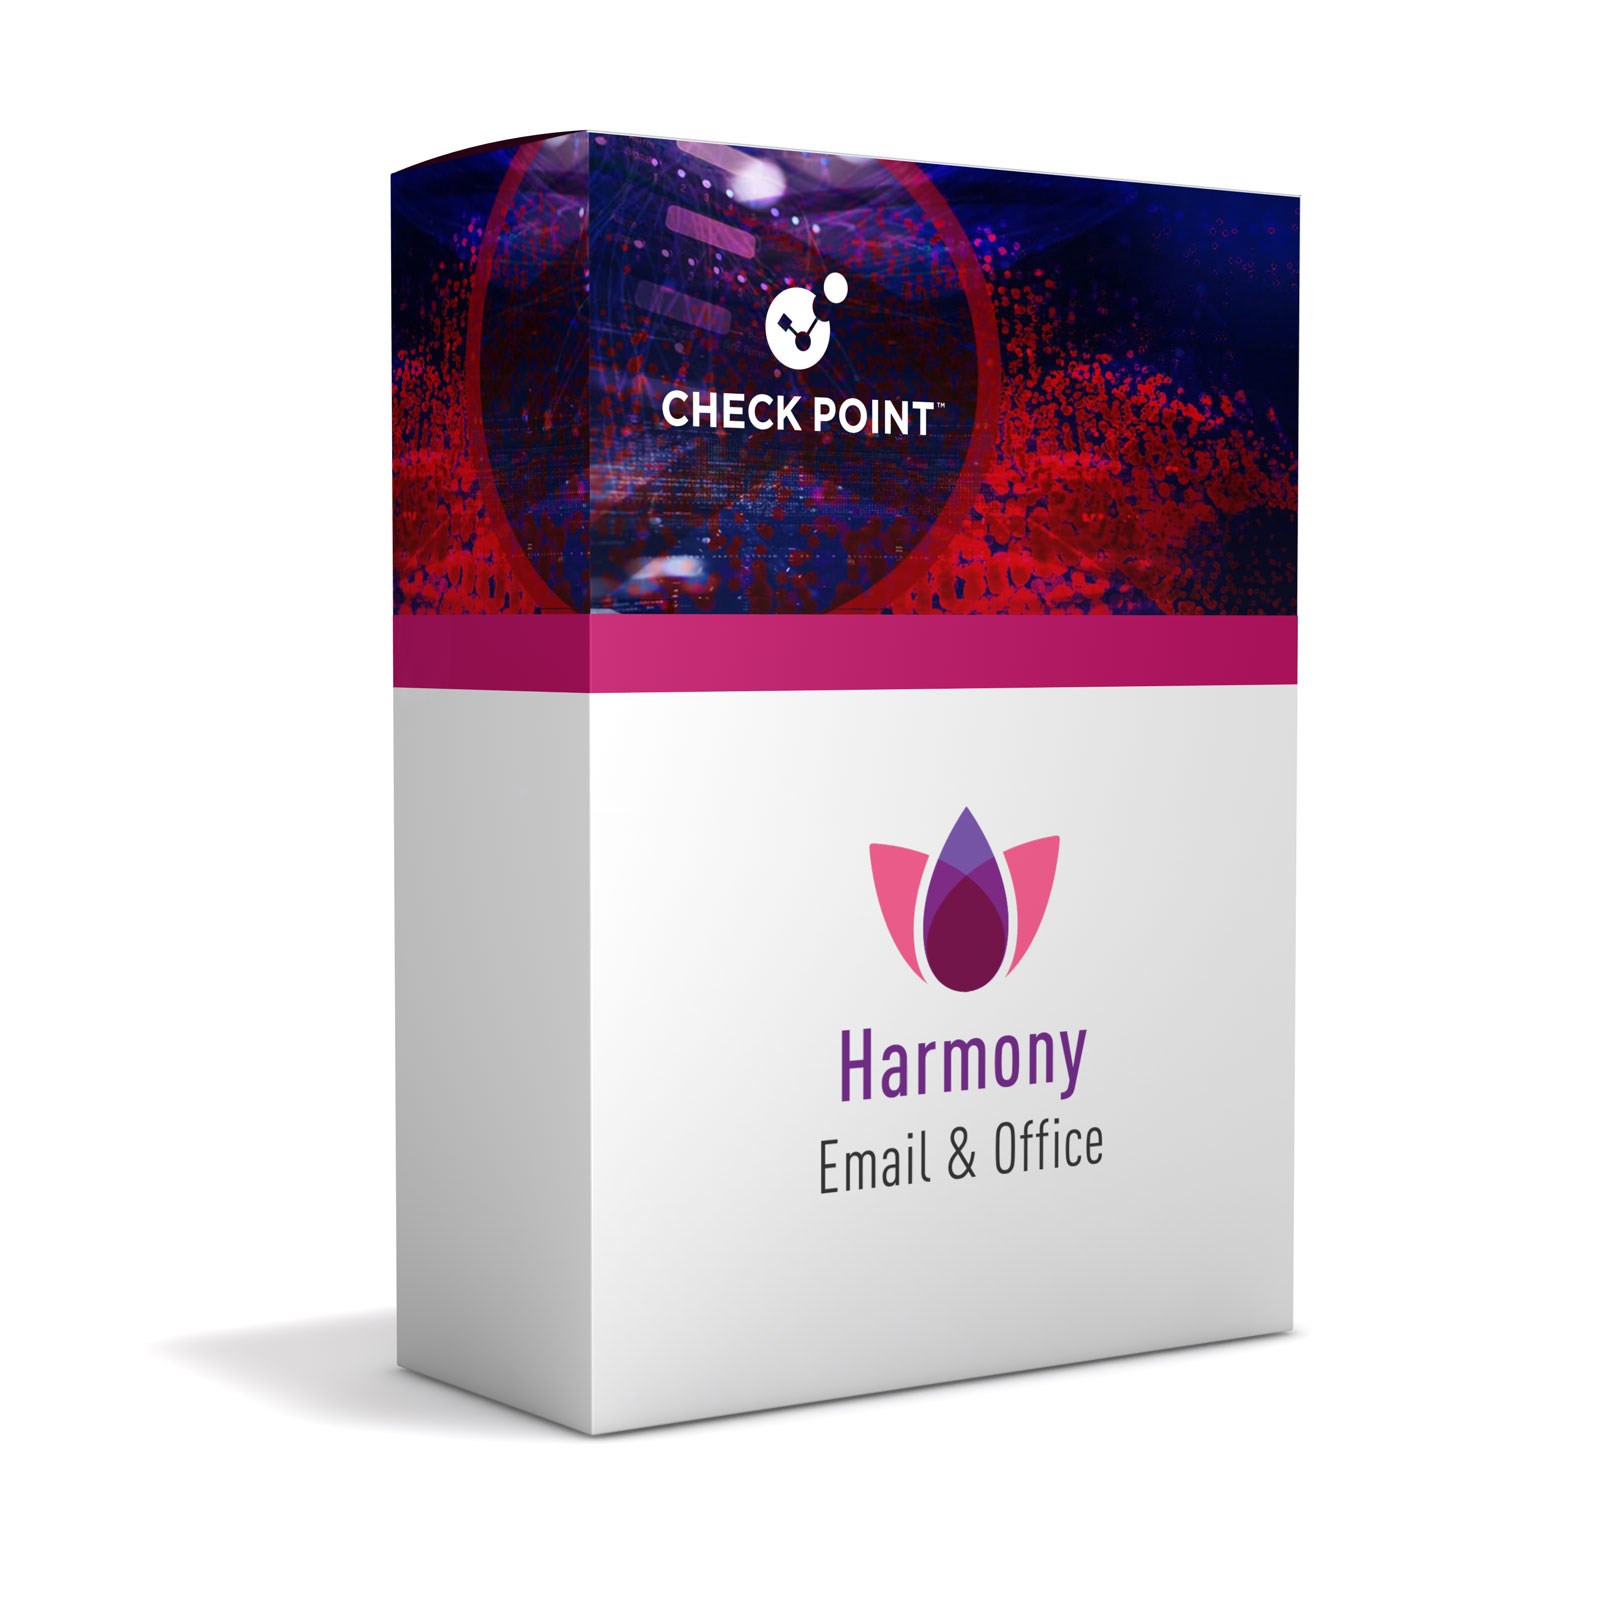 Check Point Harmony Email only Basic Protect, Standard direct support, 1 year0 